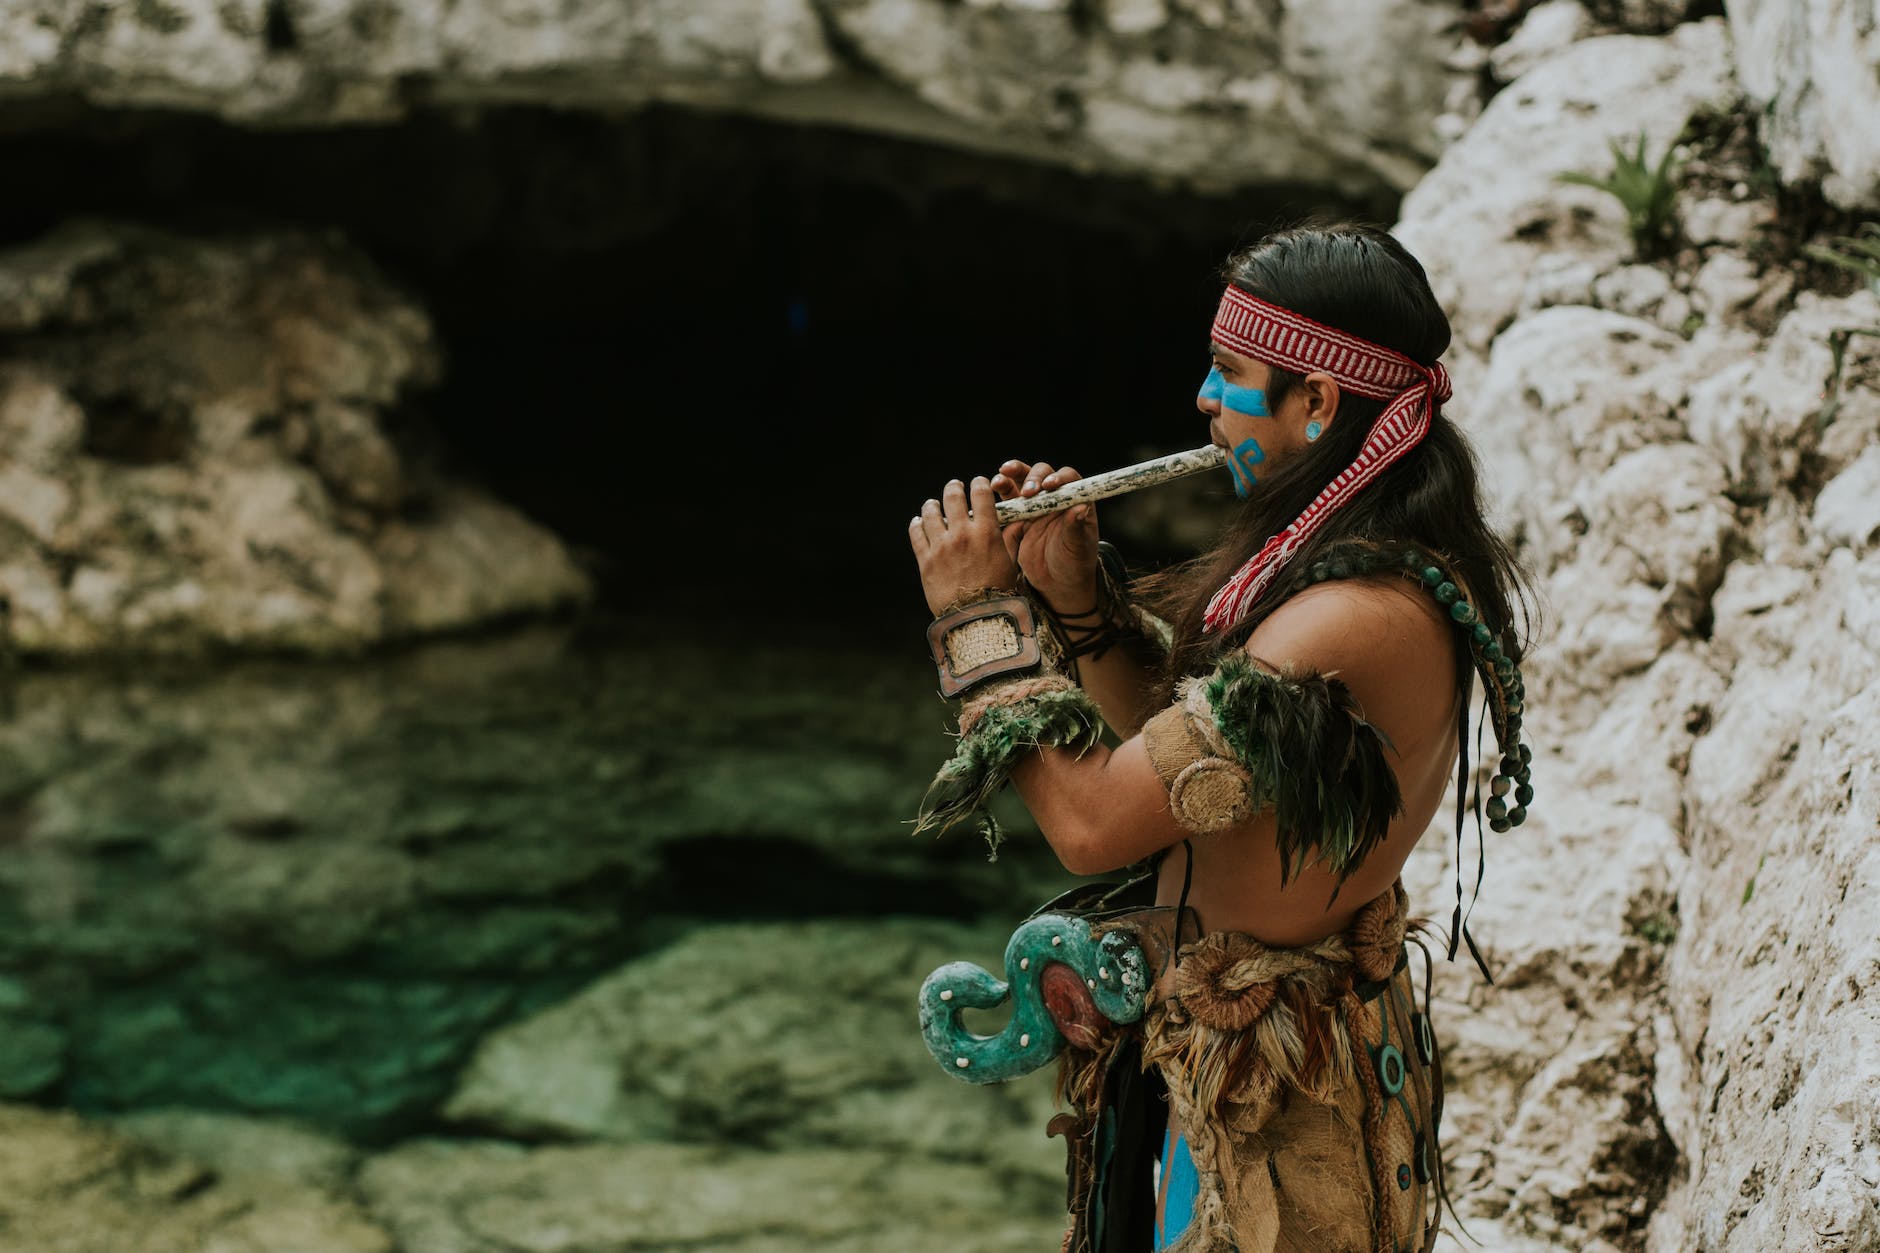 man in traditional maya clothes and face paint standing by water playing instrument